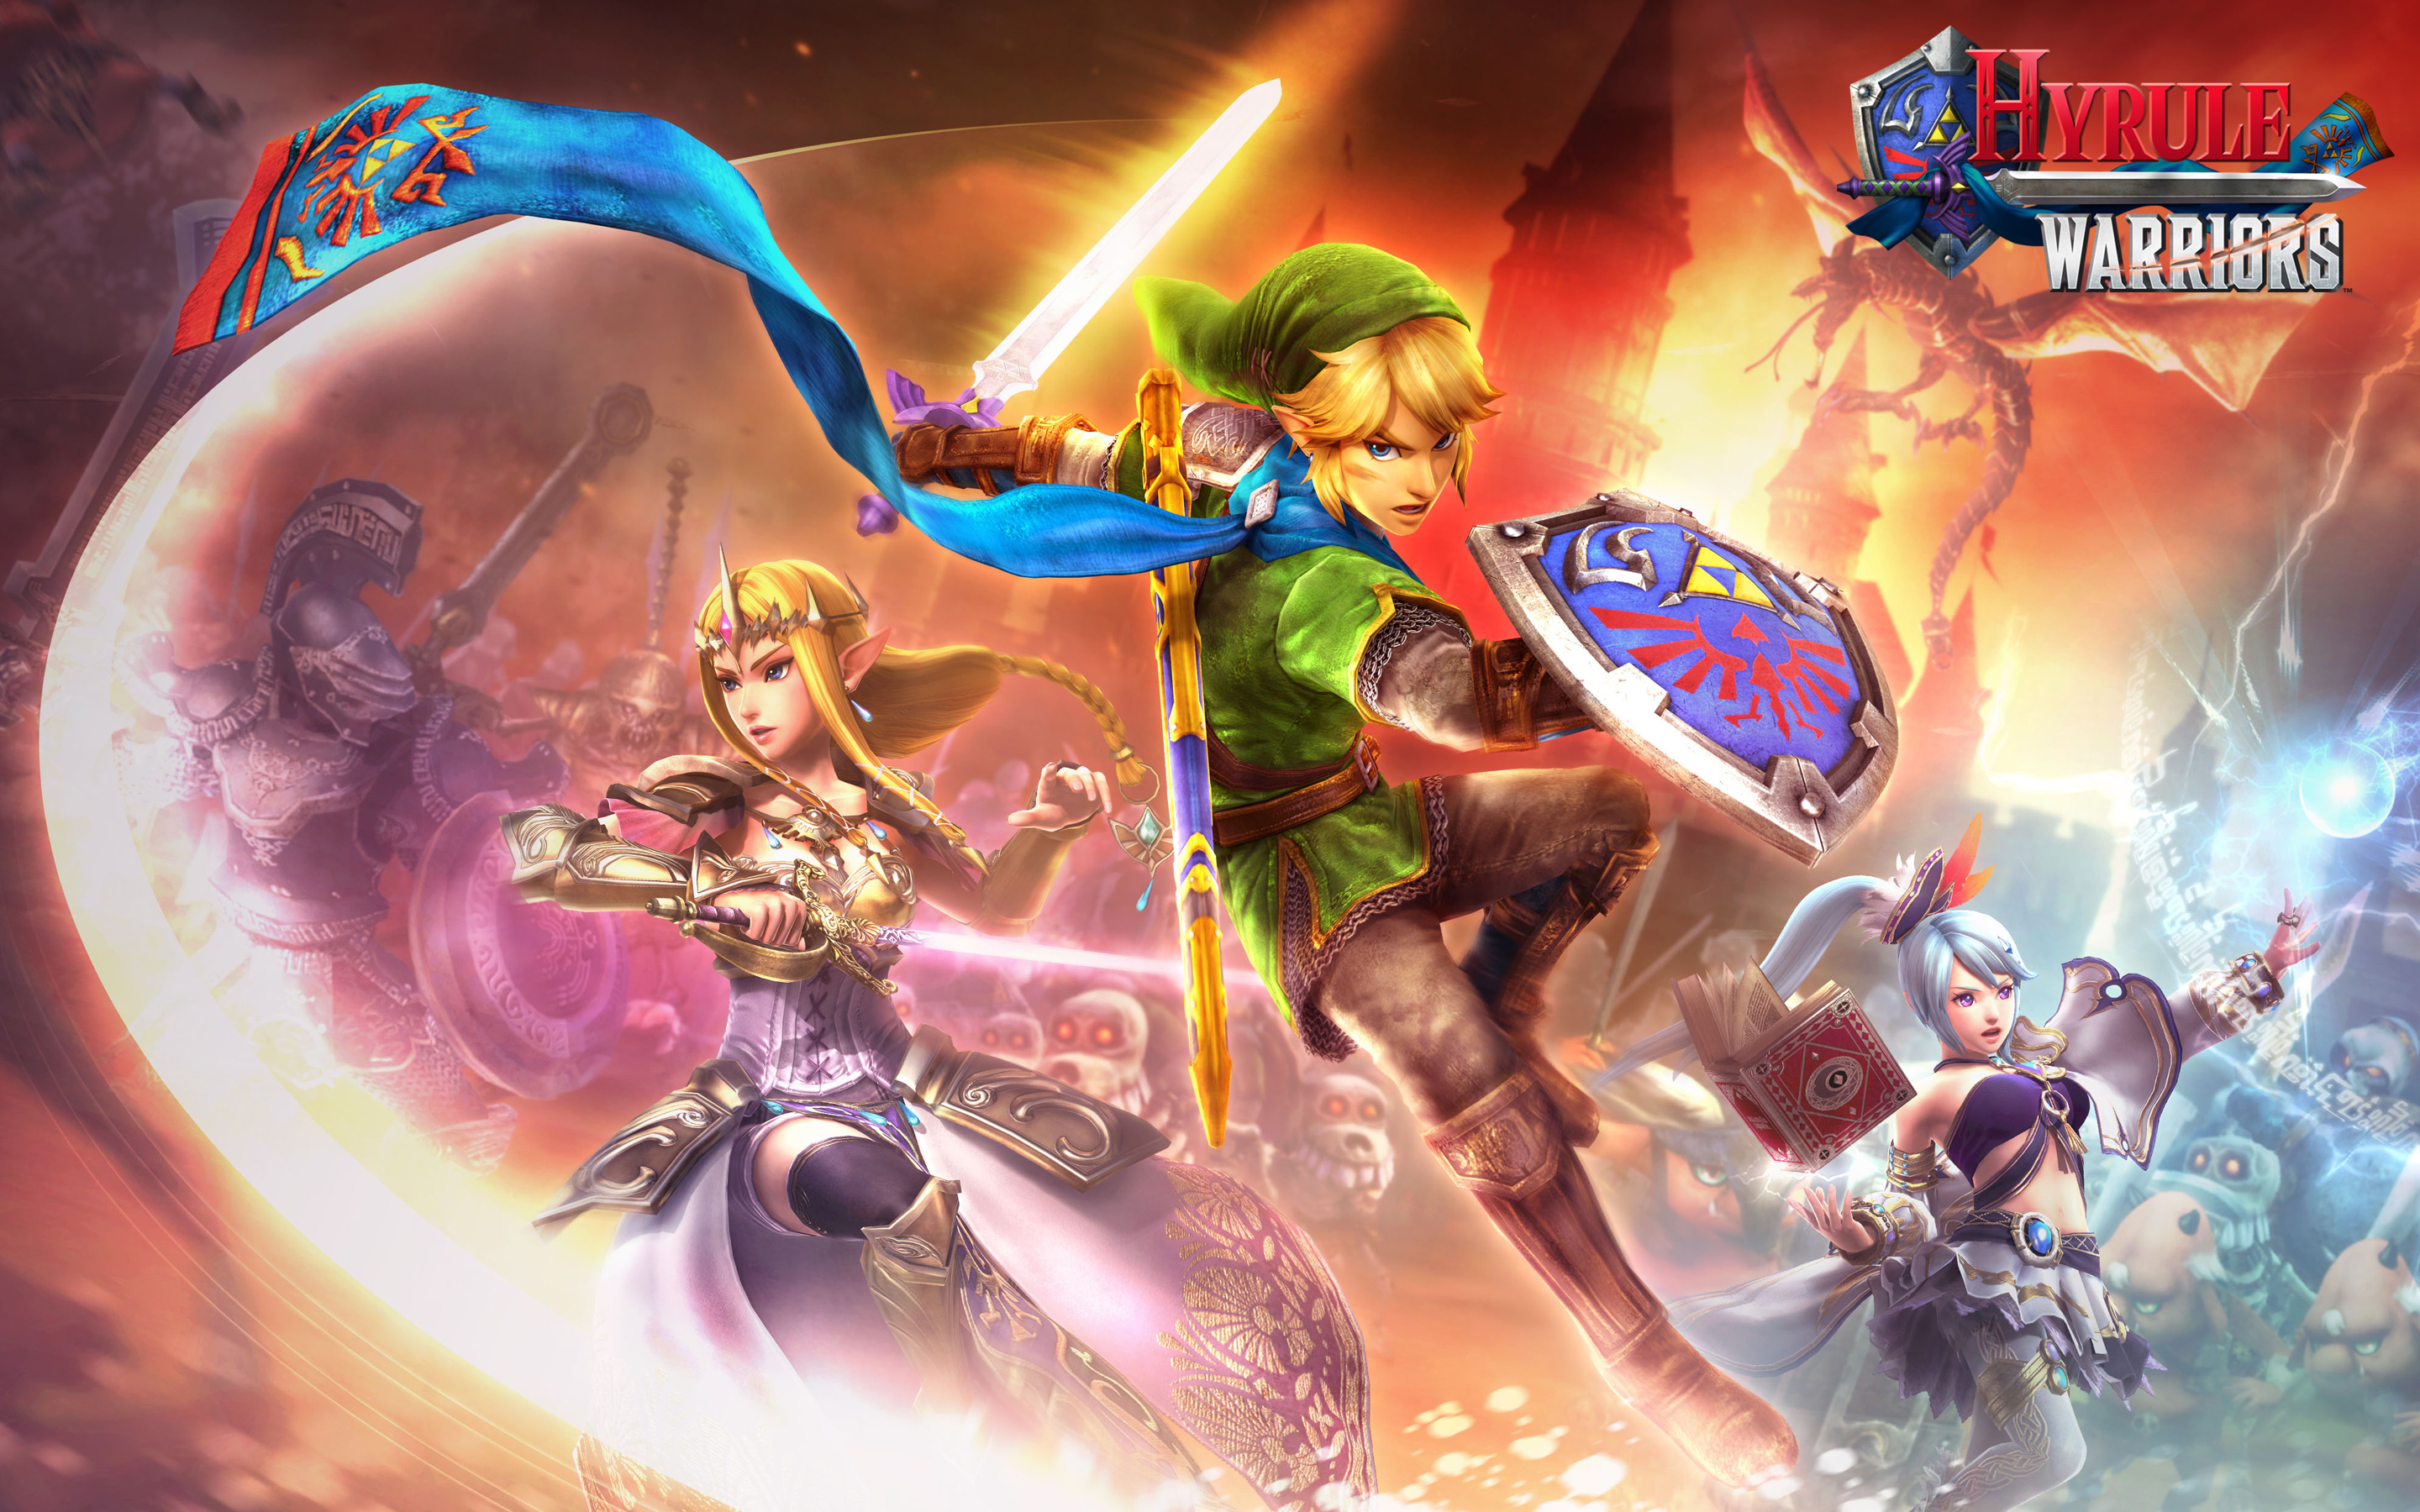 Video Game Hyrule Warriors HD Wallpaper | Background Image